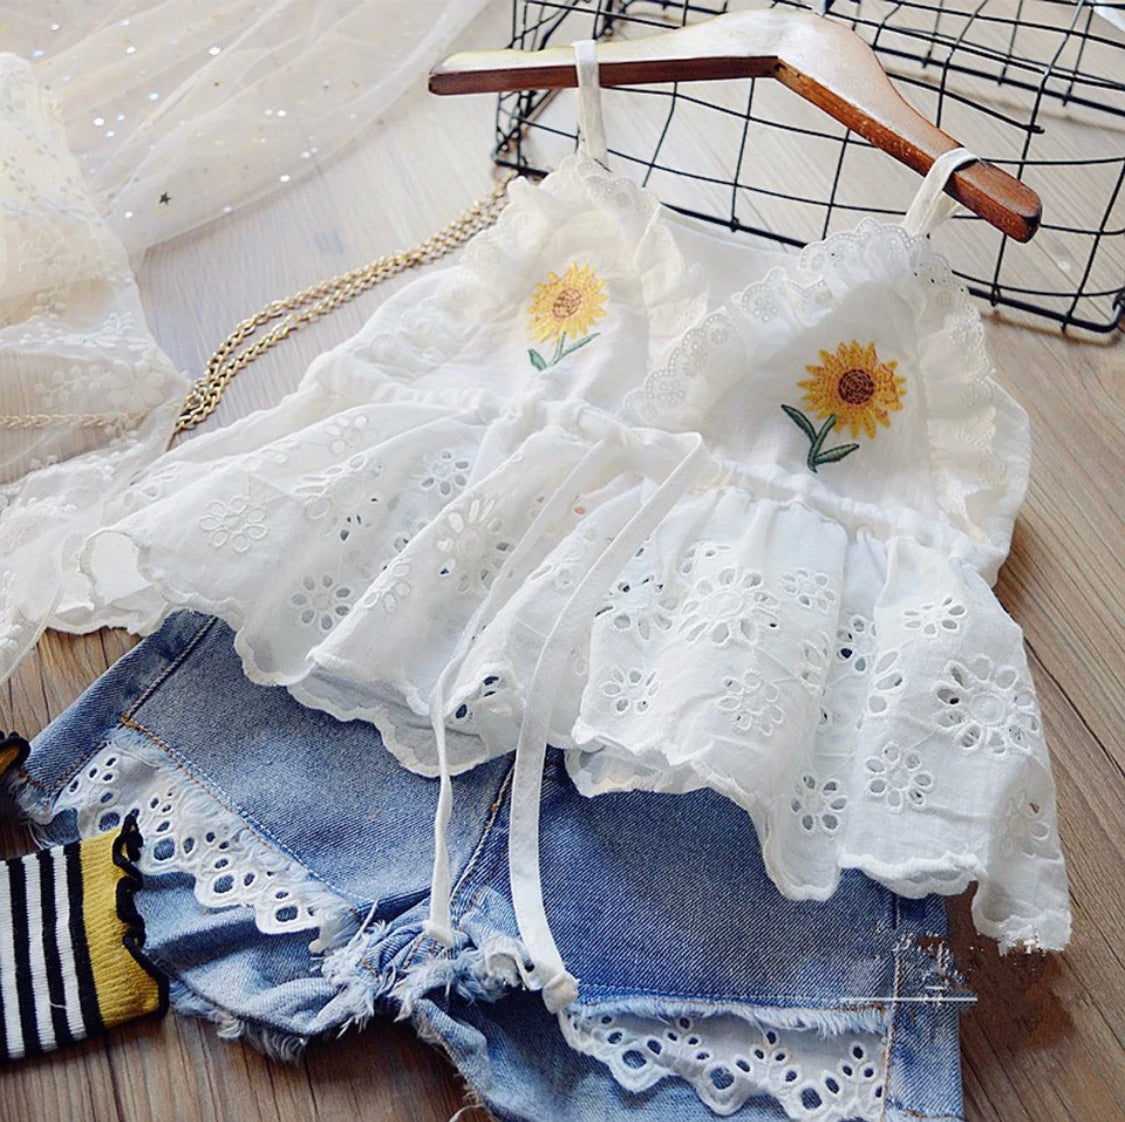 White sunflower outfit